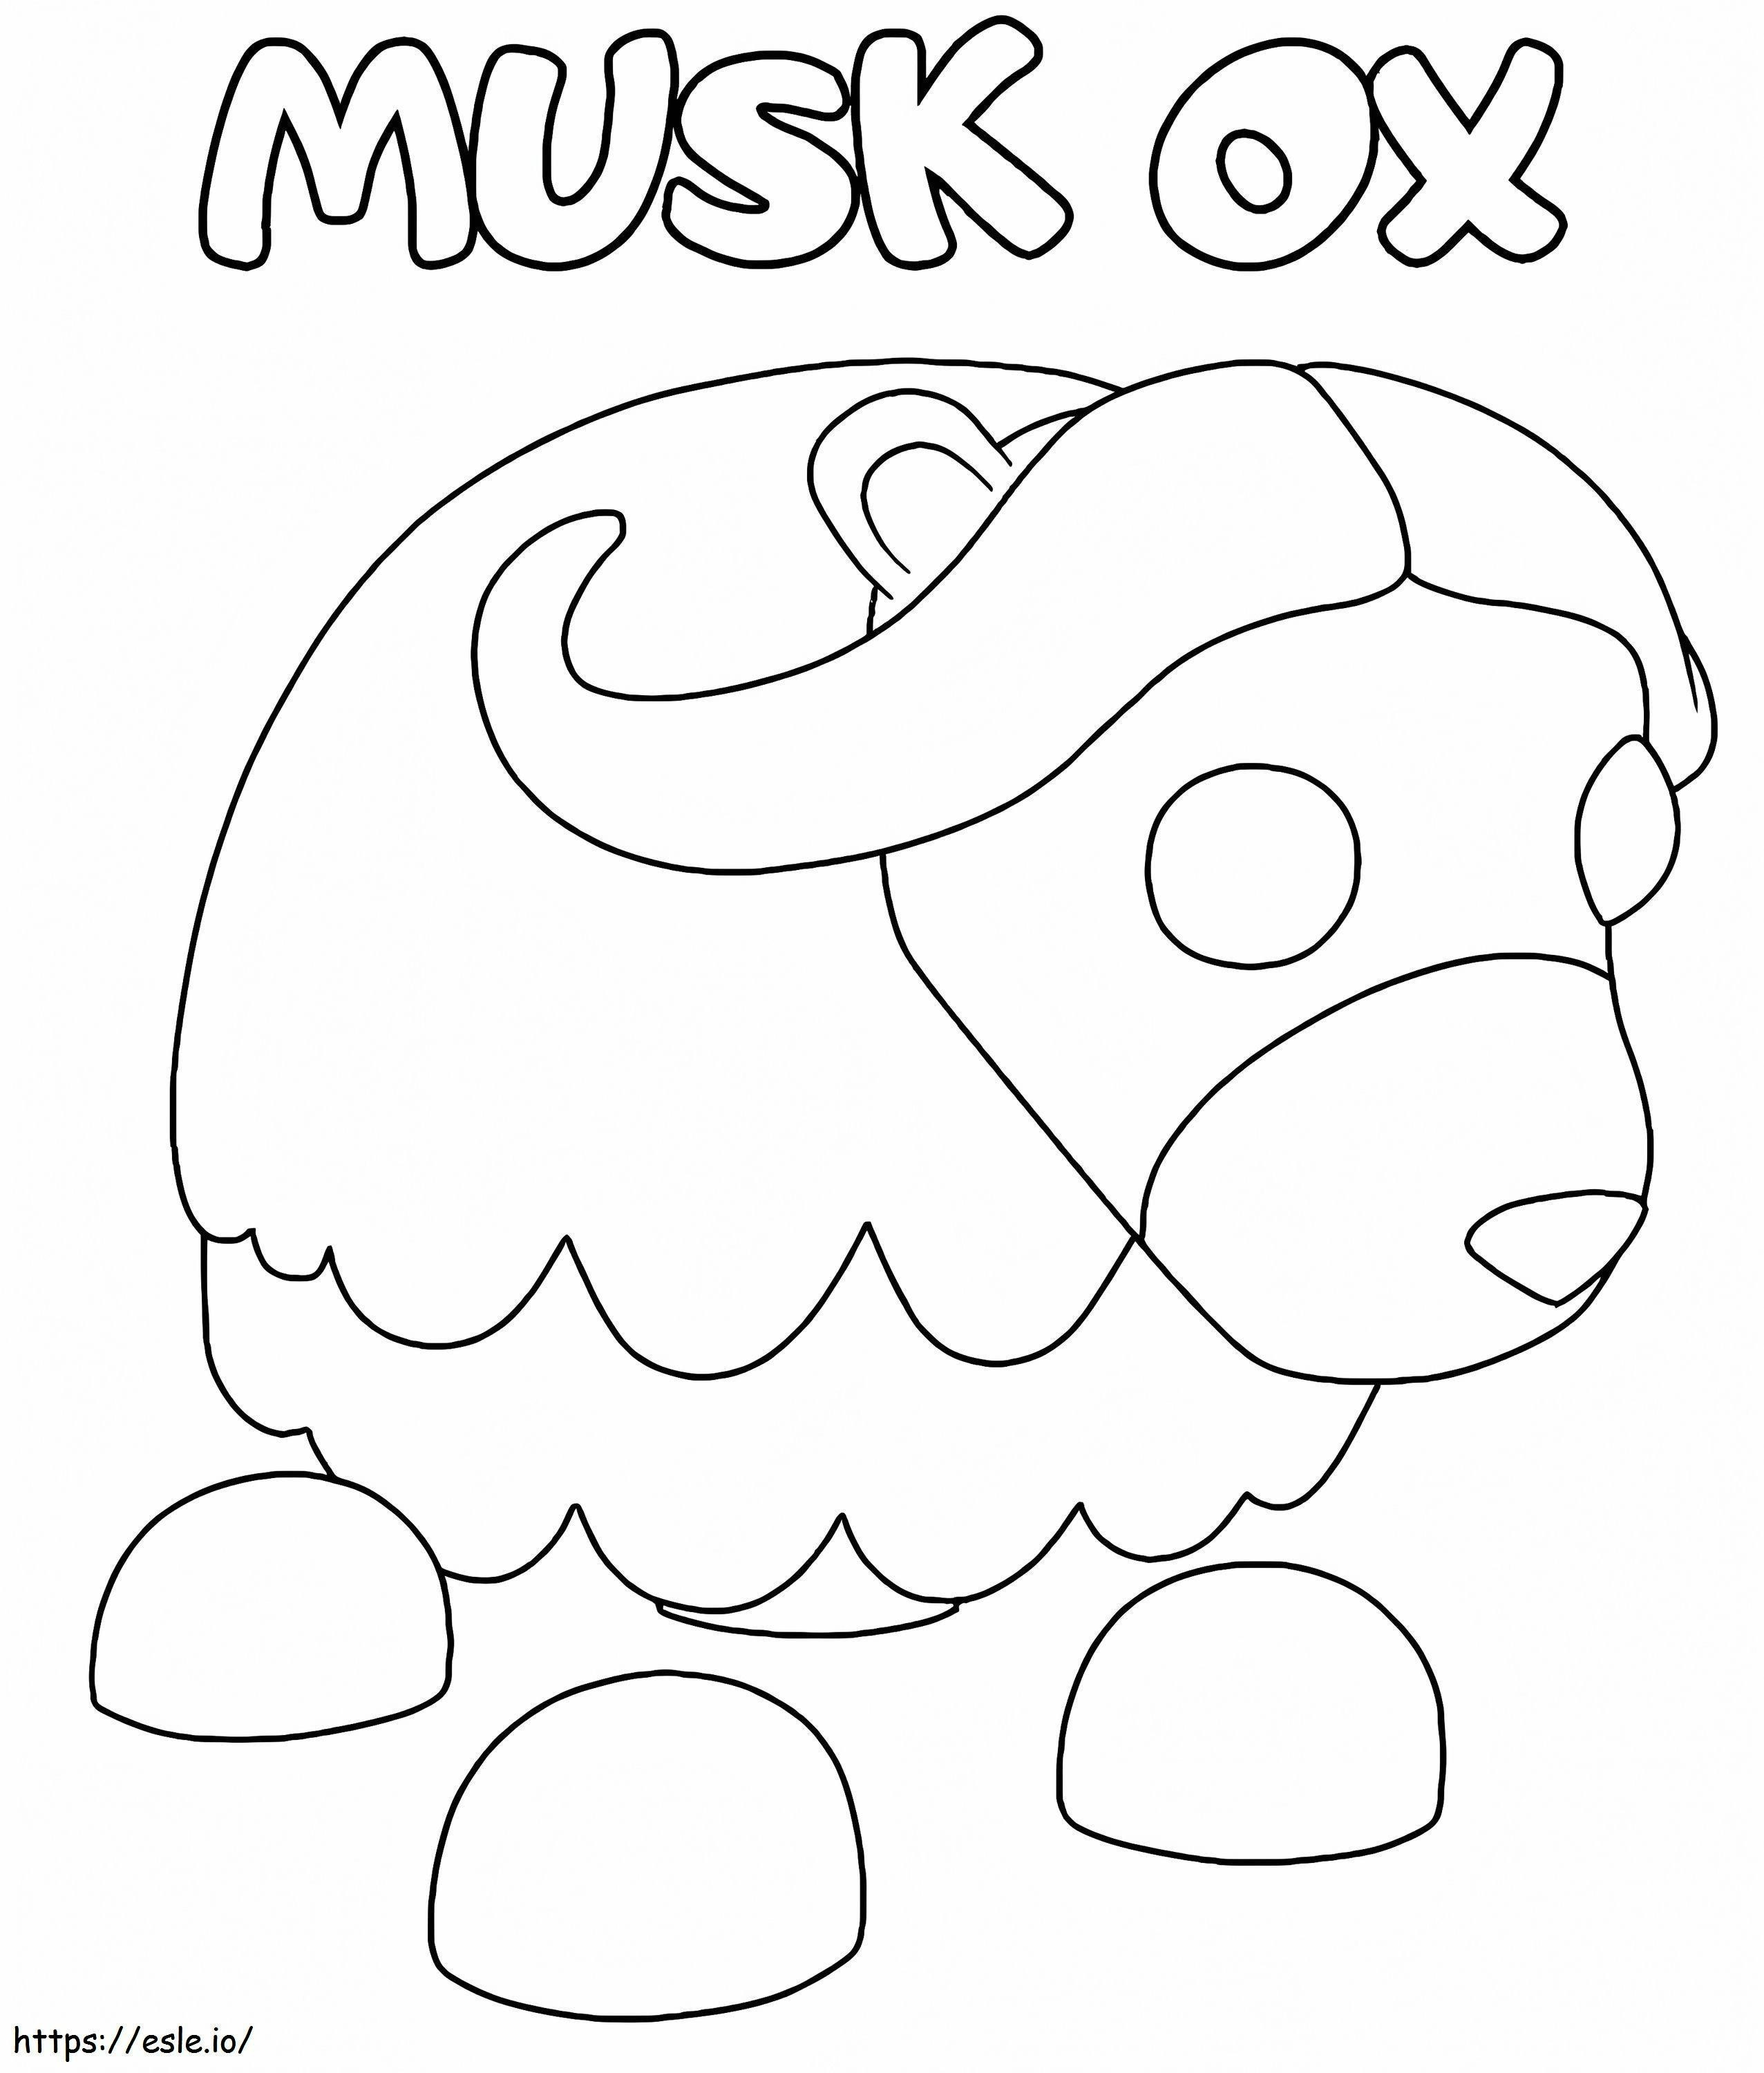 Musk Ox Adopt Me coloring page